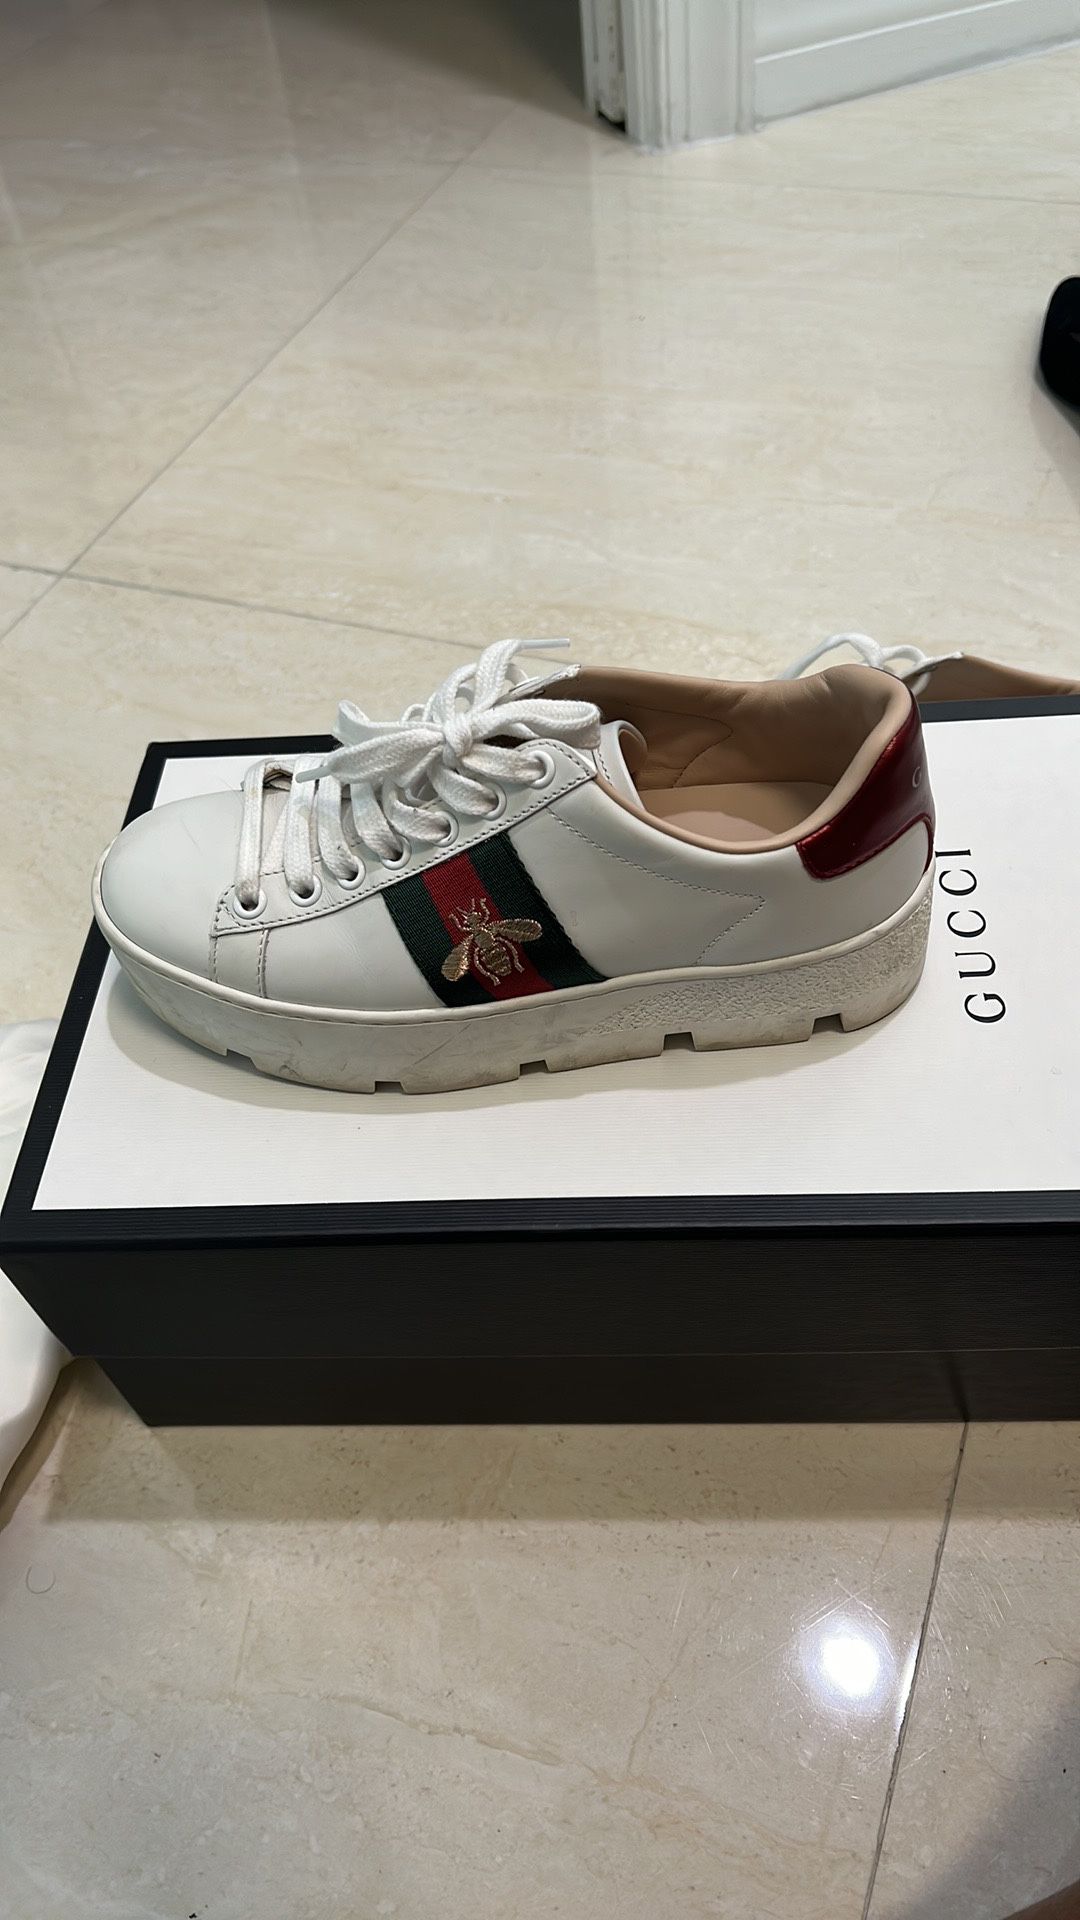 Gently Used AUTHENTIC GUCCI PLATFORM SNEAKERS